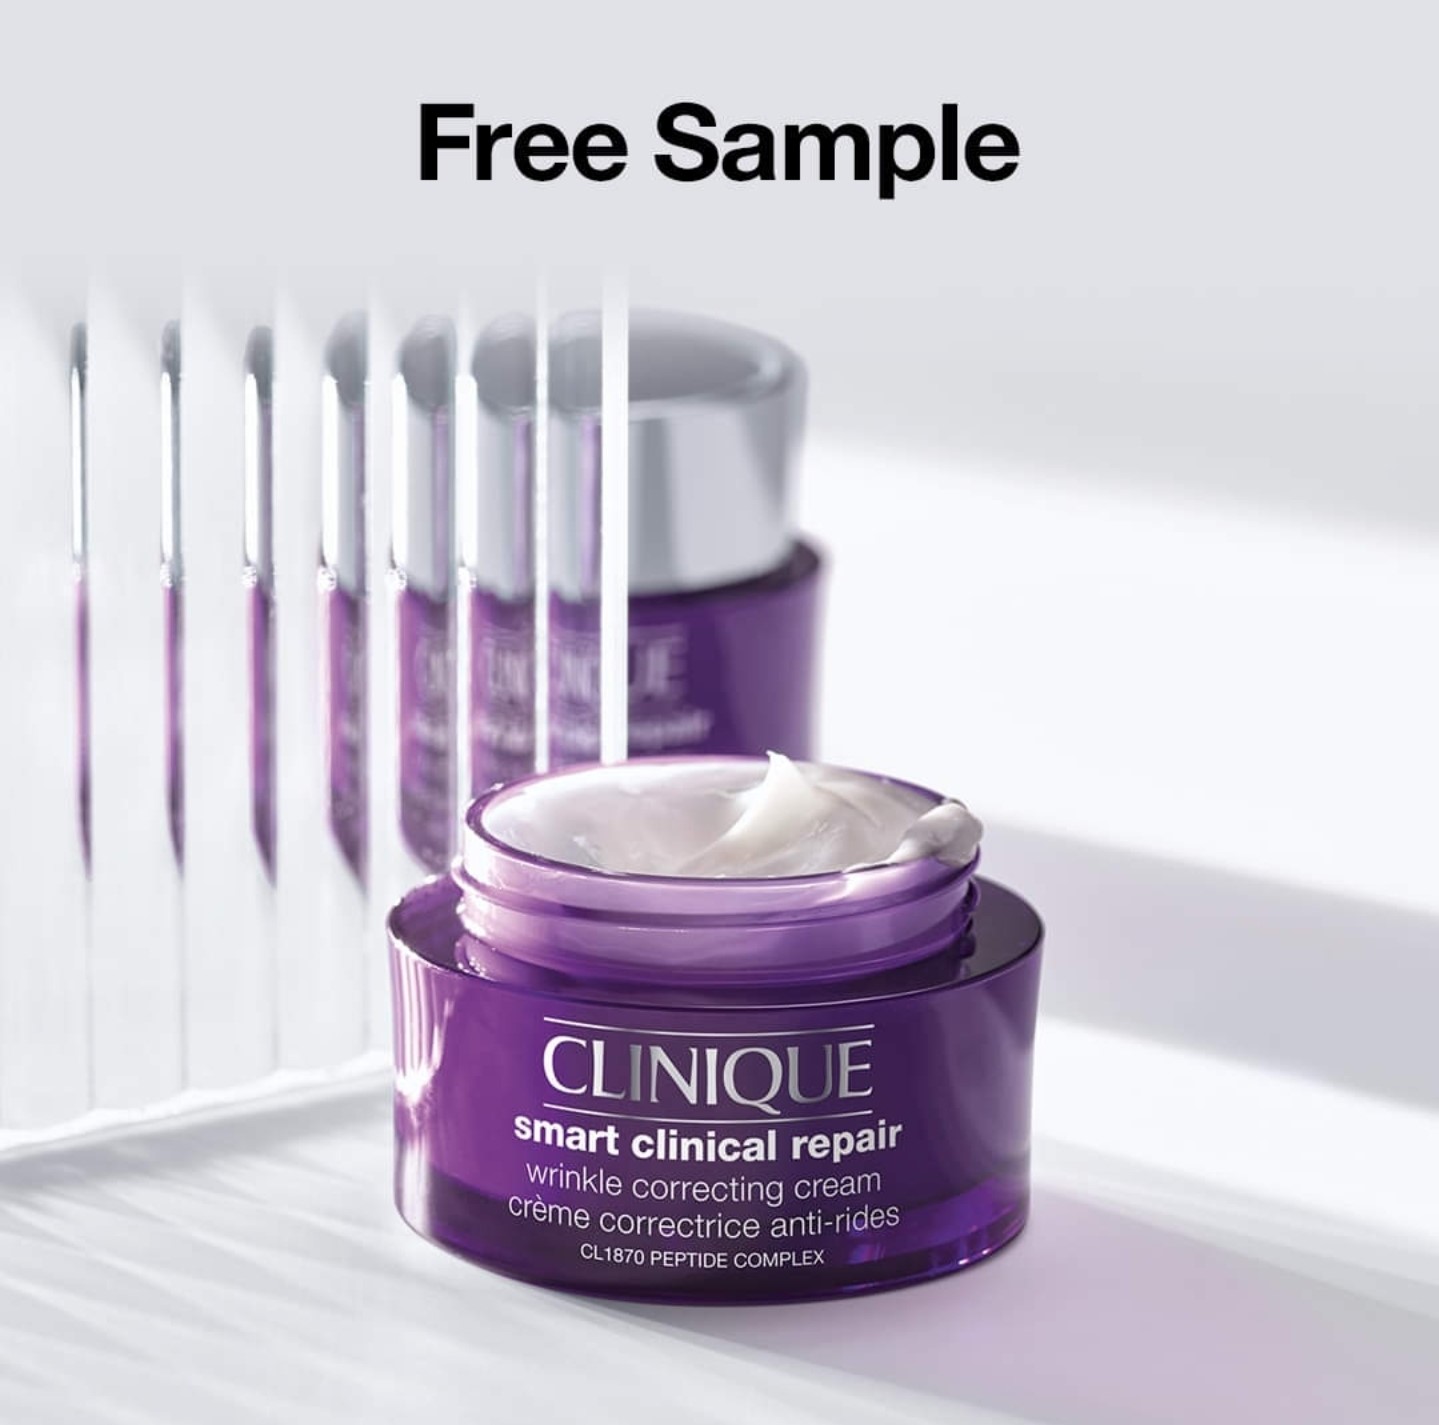 Free Sample of Clinique Smart Clinical Repair Wrinkle Correcting Cream